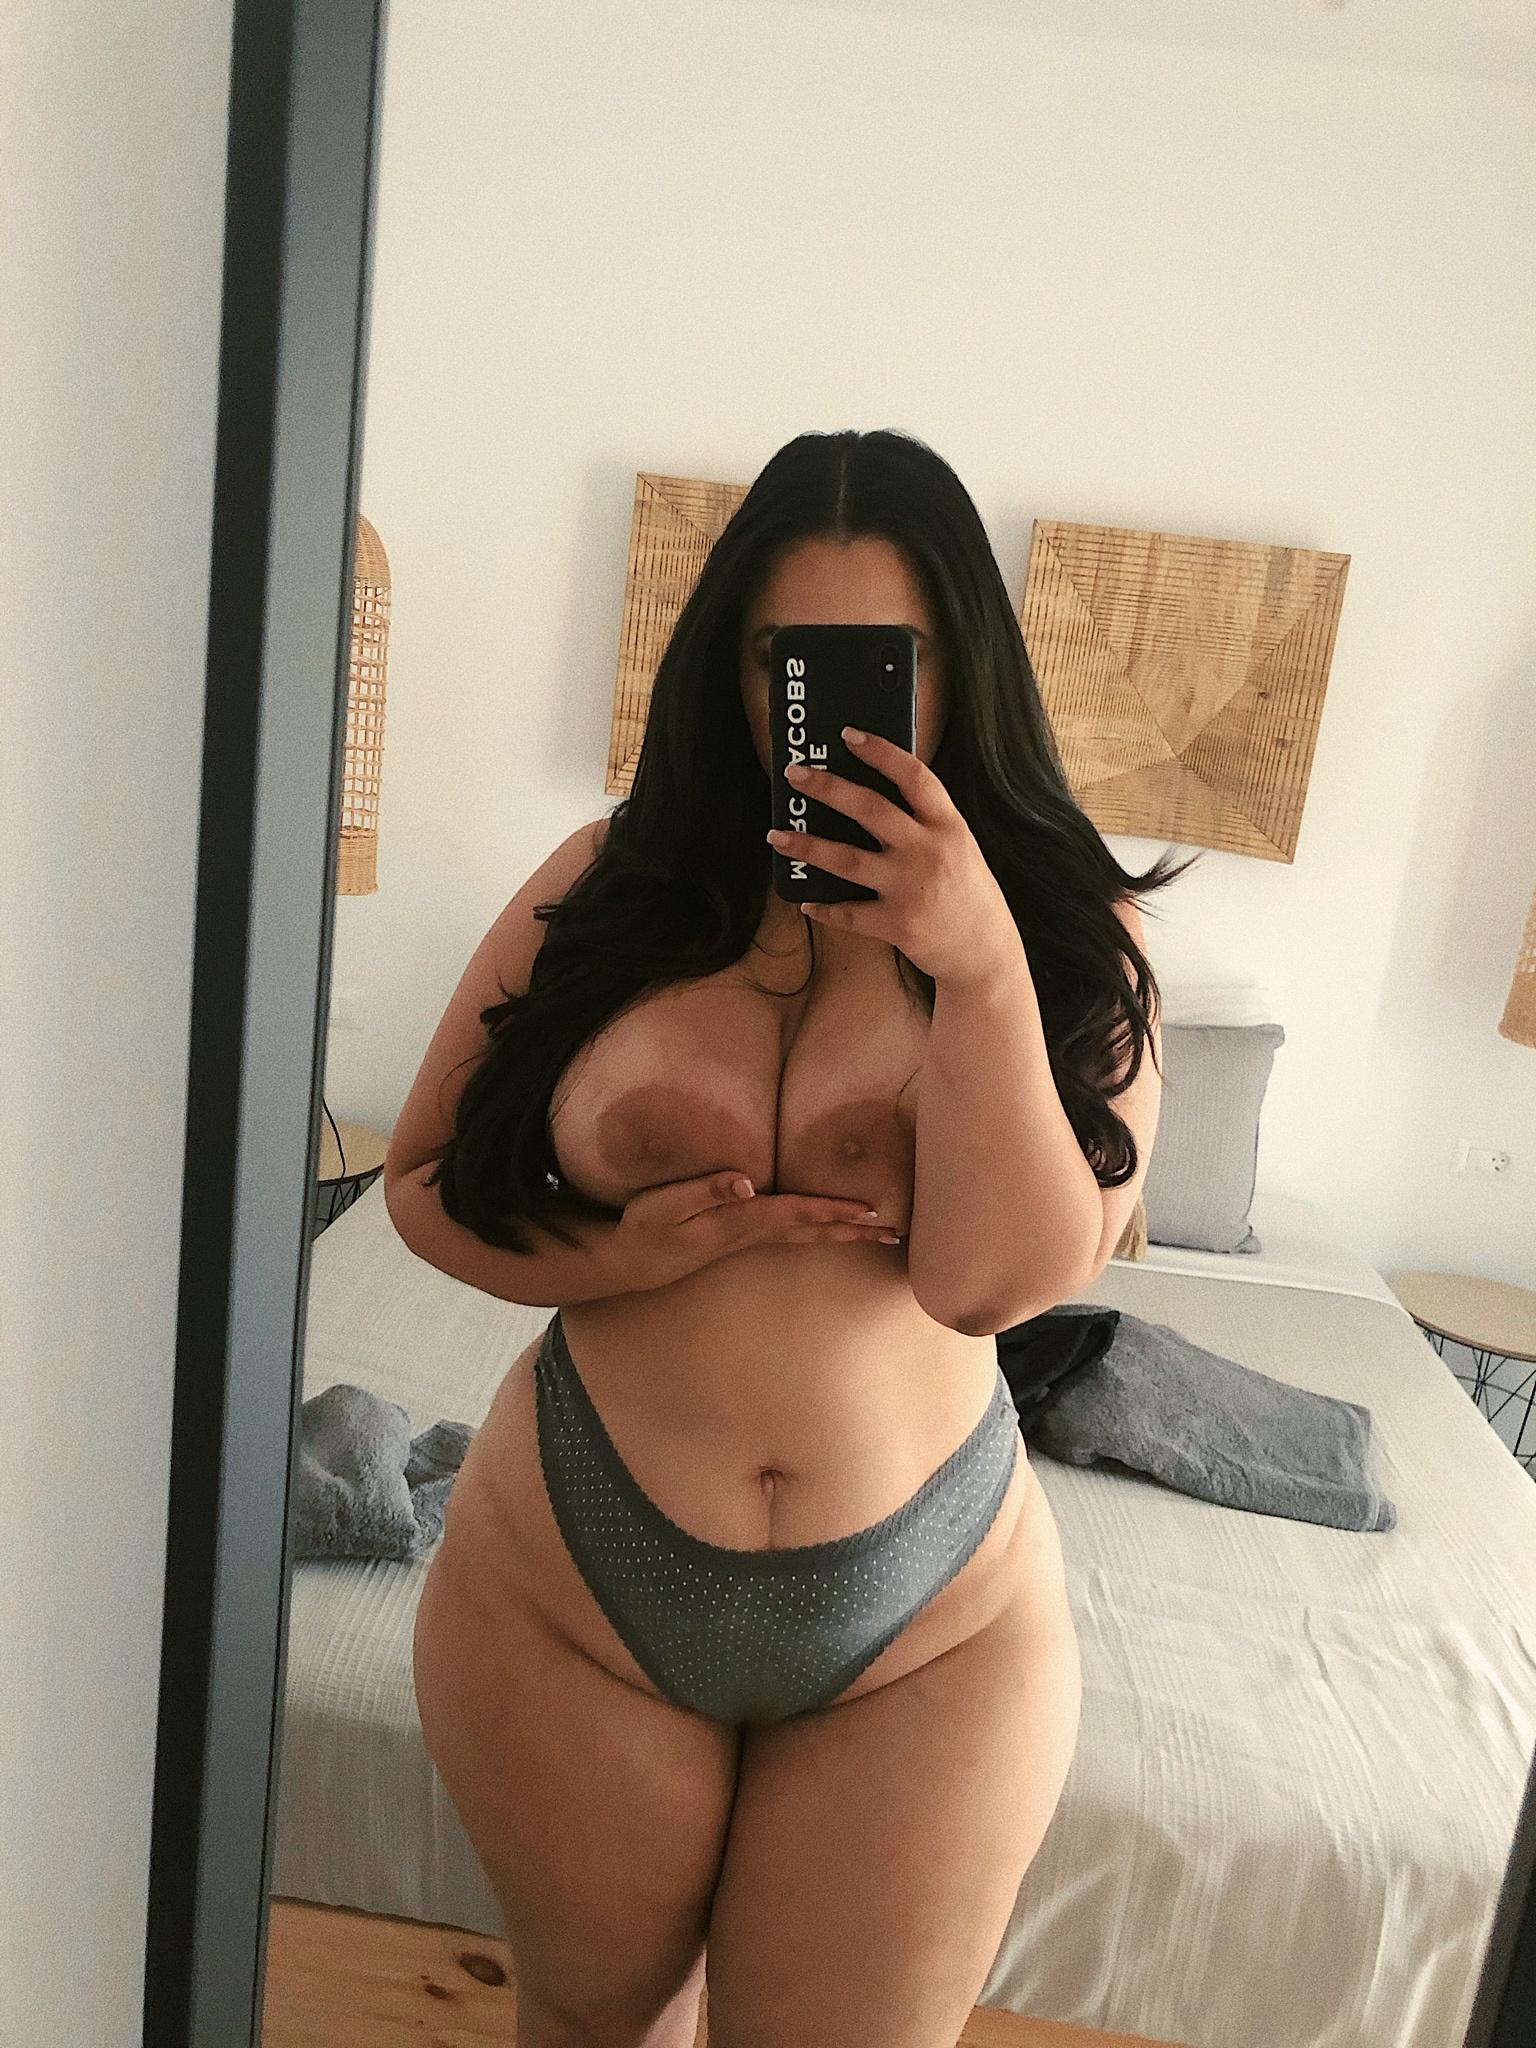 Ever fucked a thick girl like me? Porn